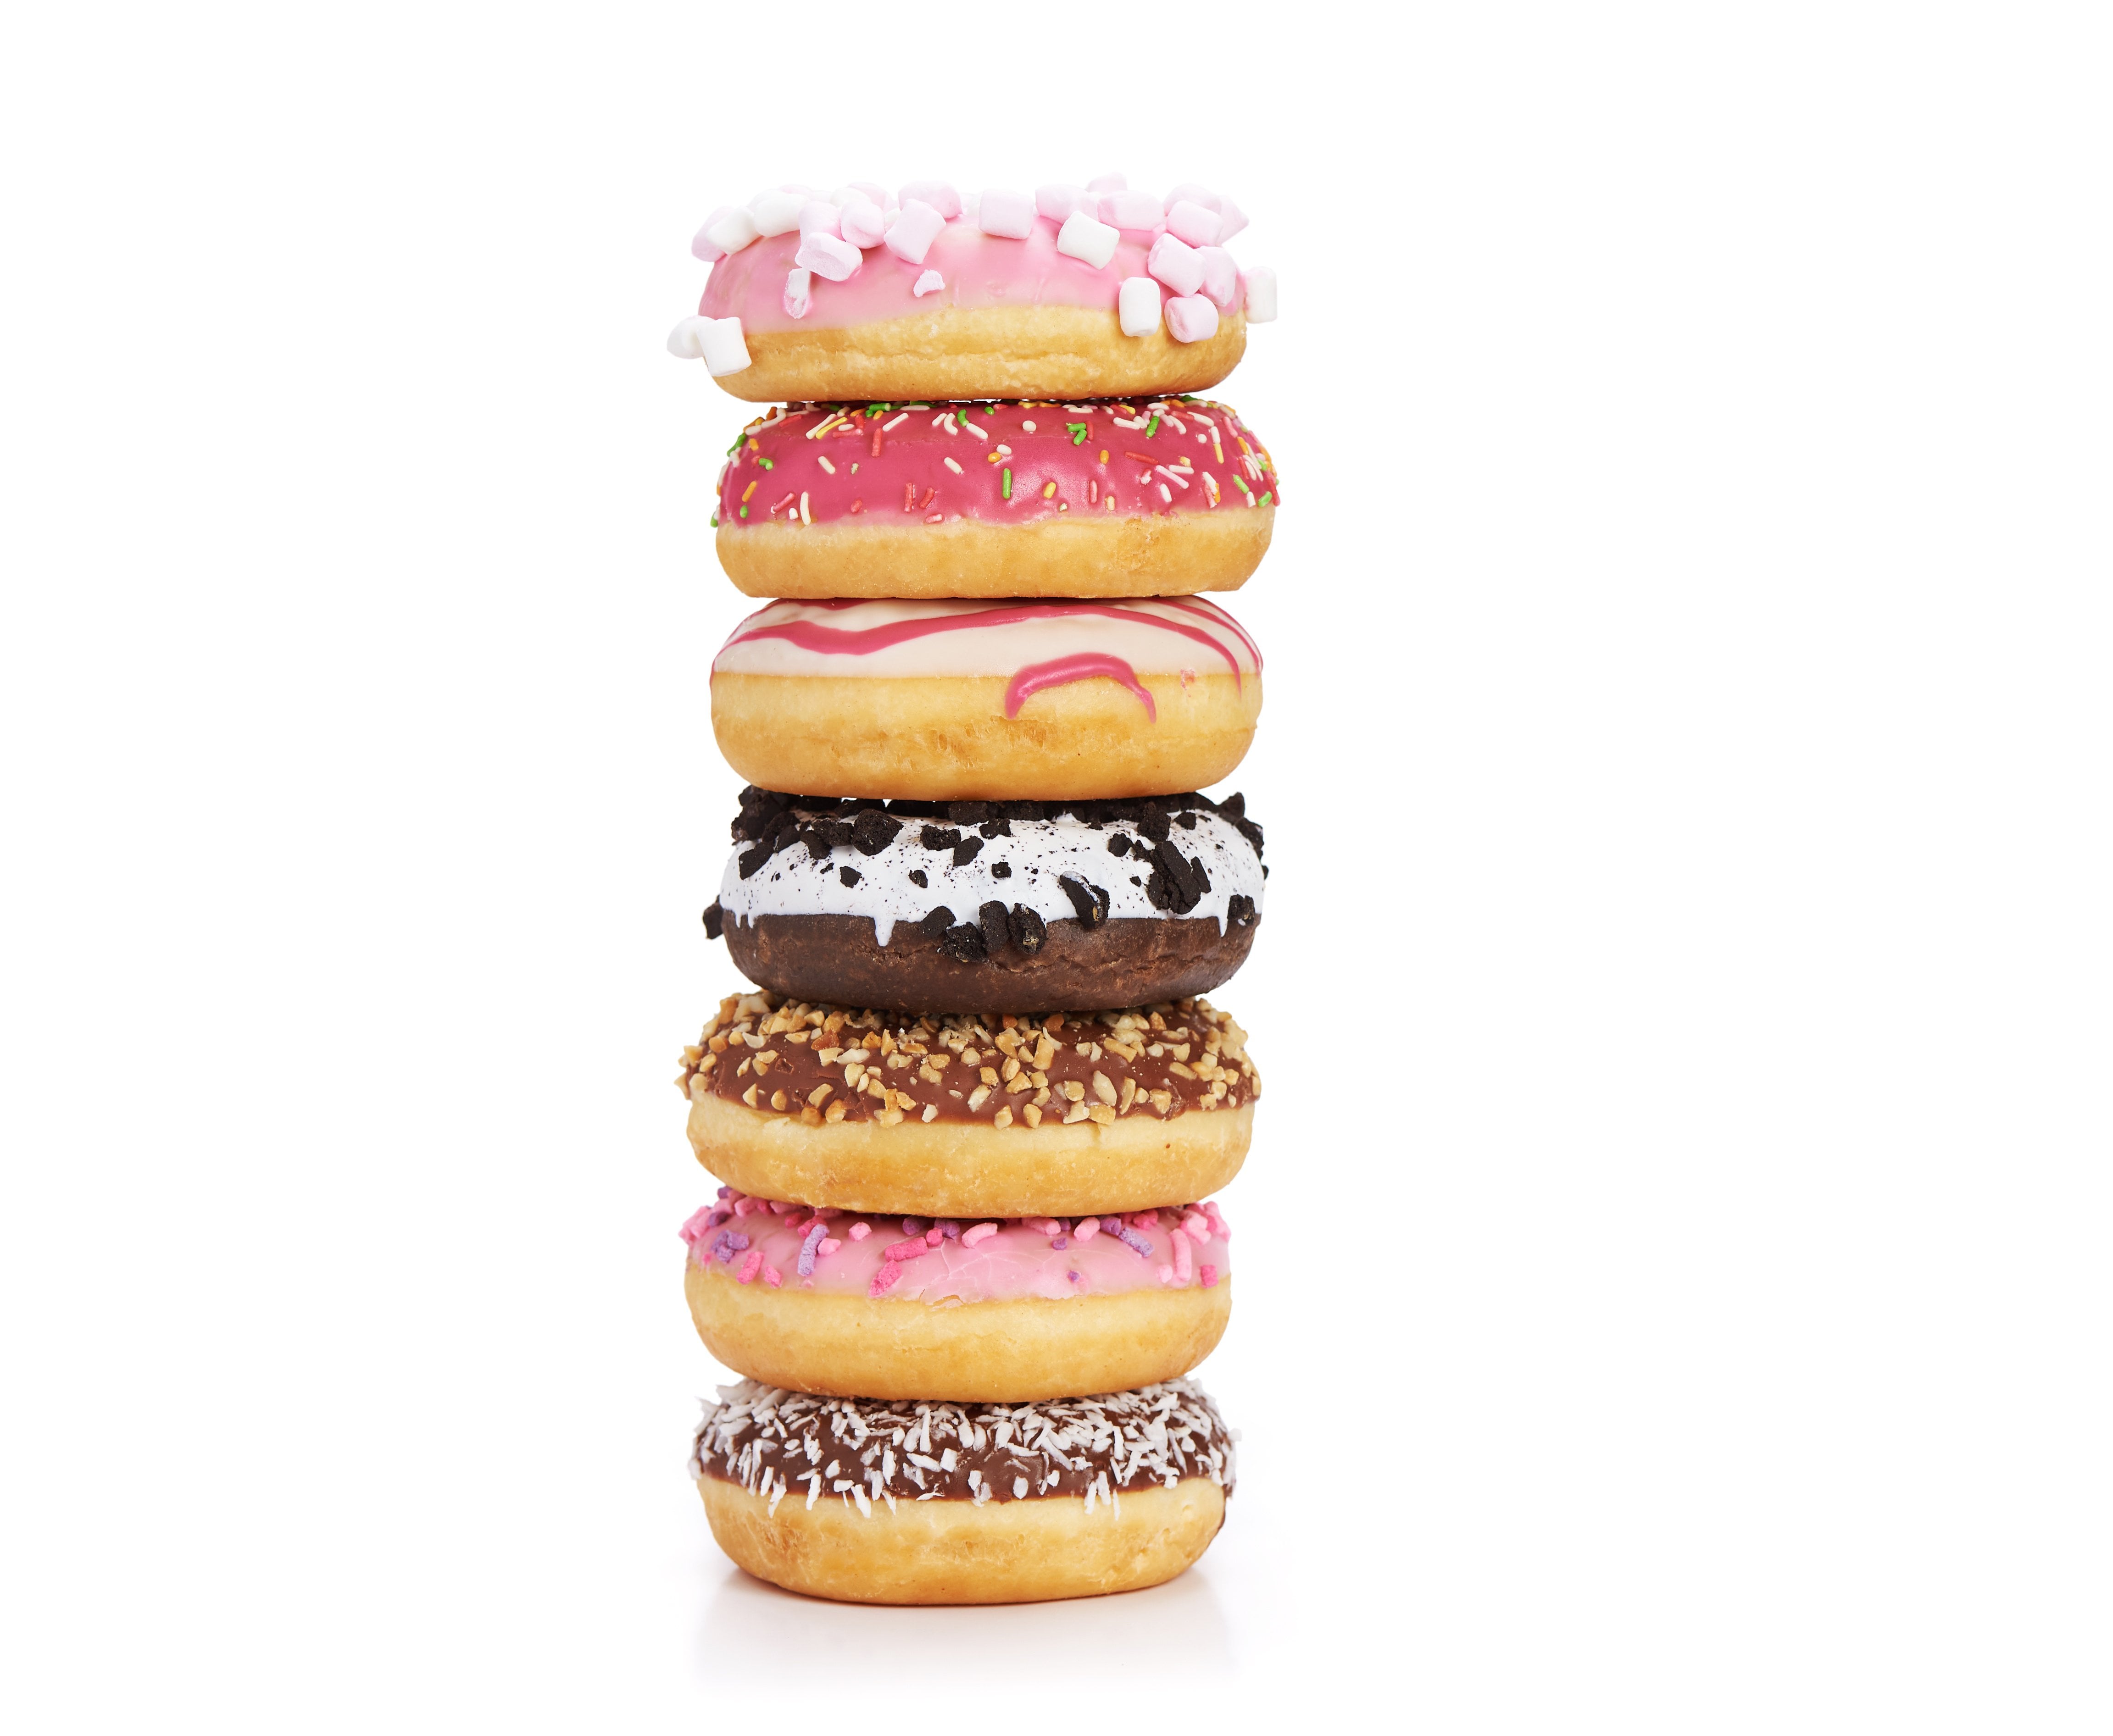 A stack of pink iced donuts